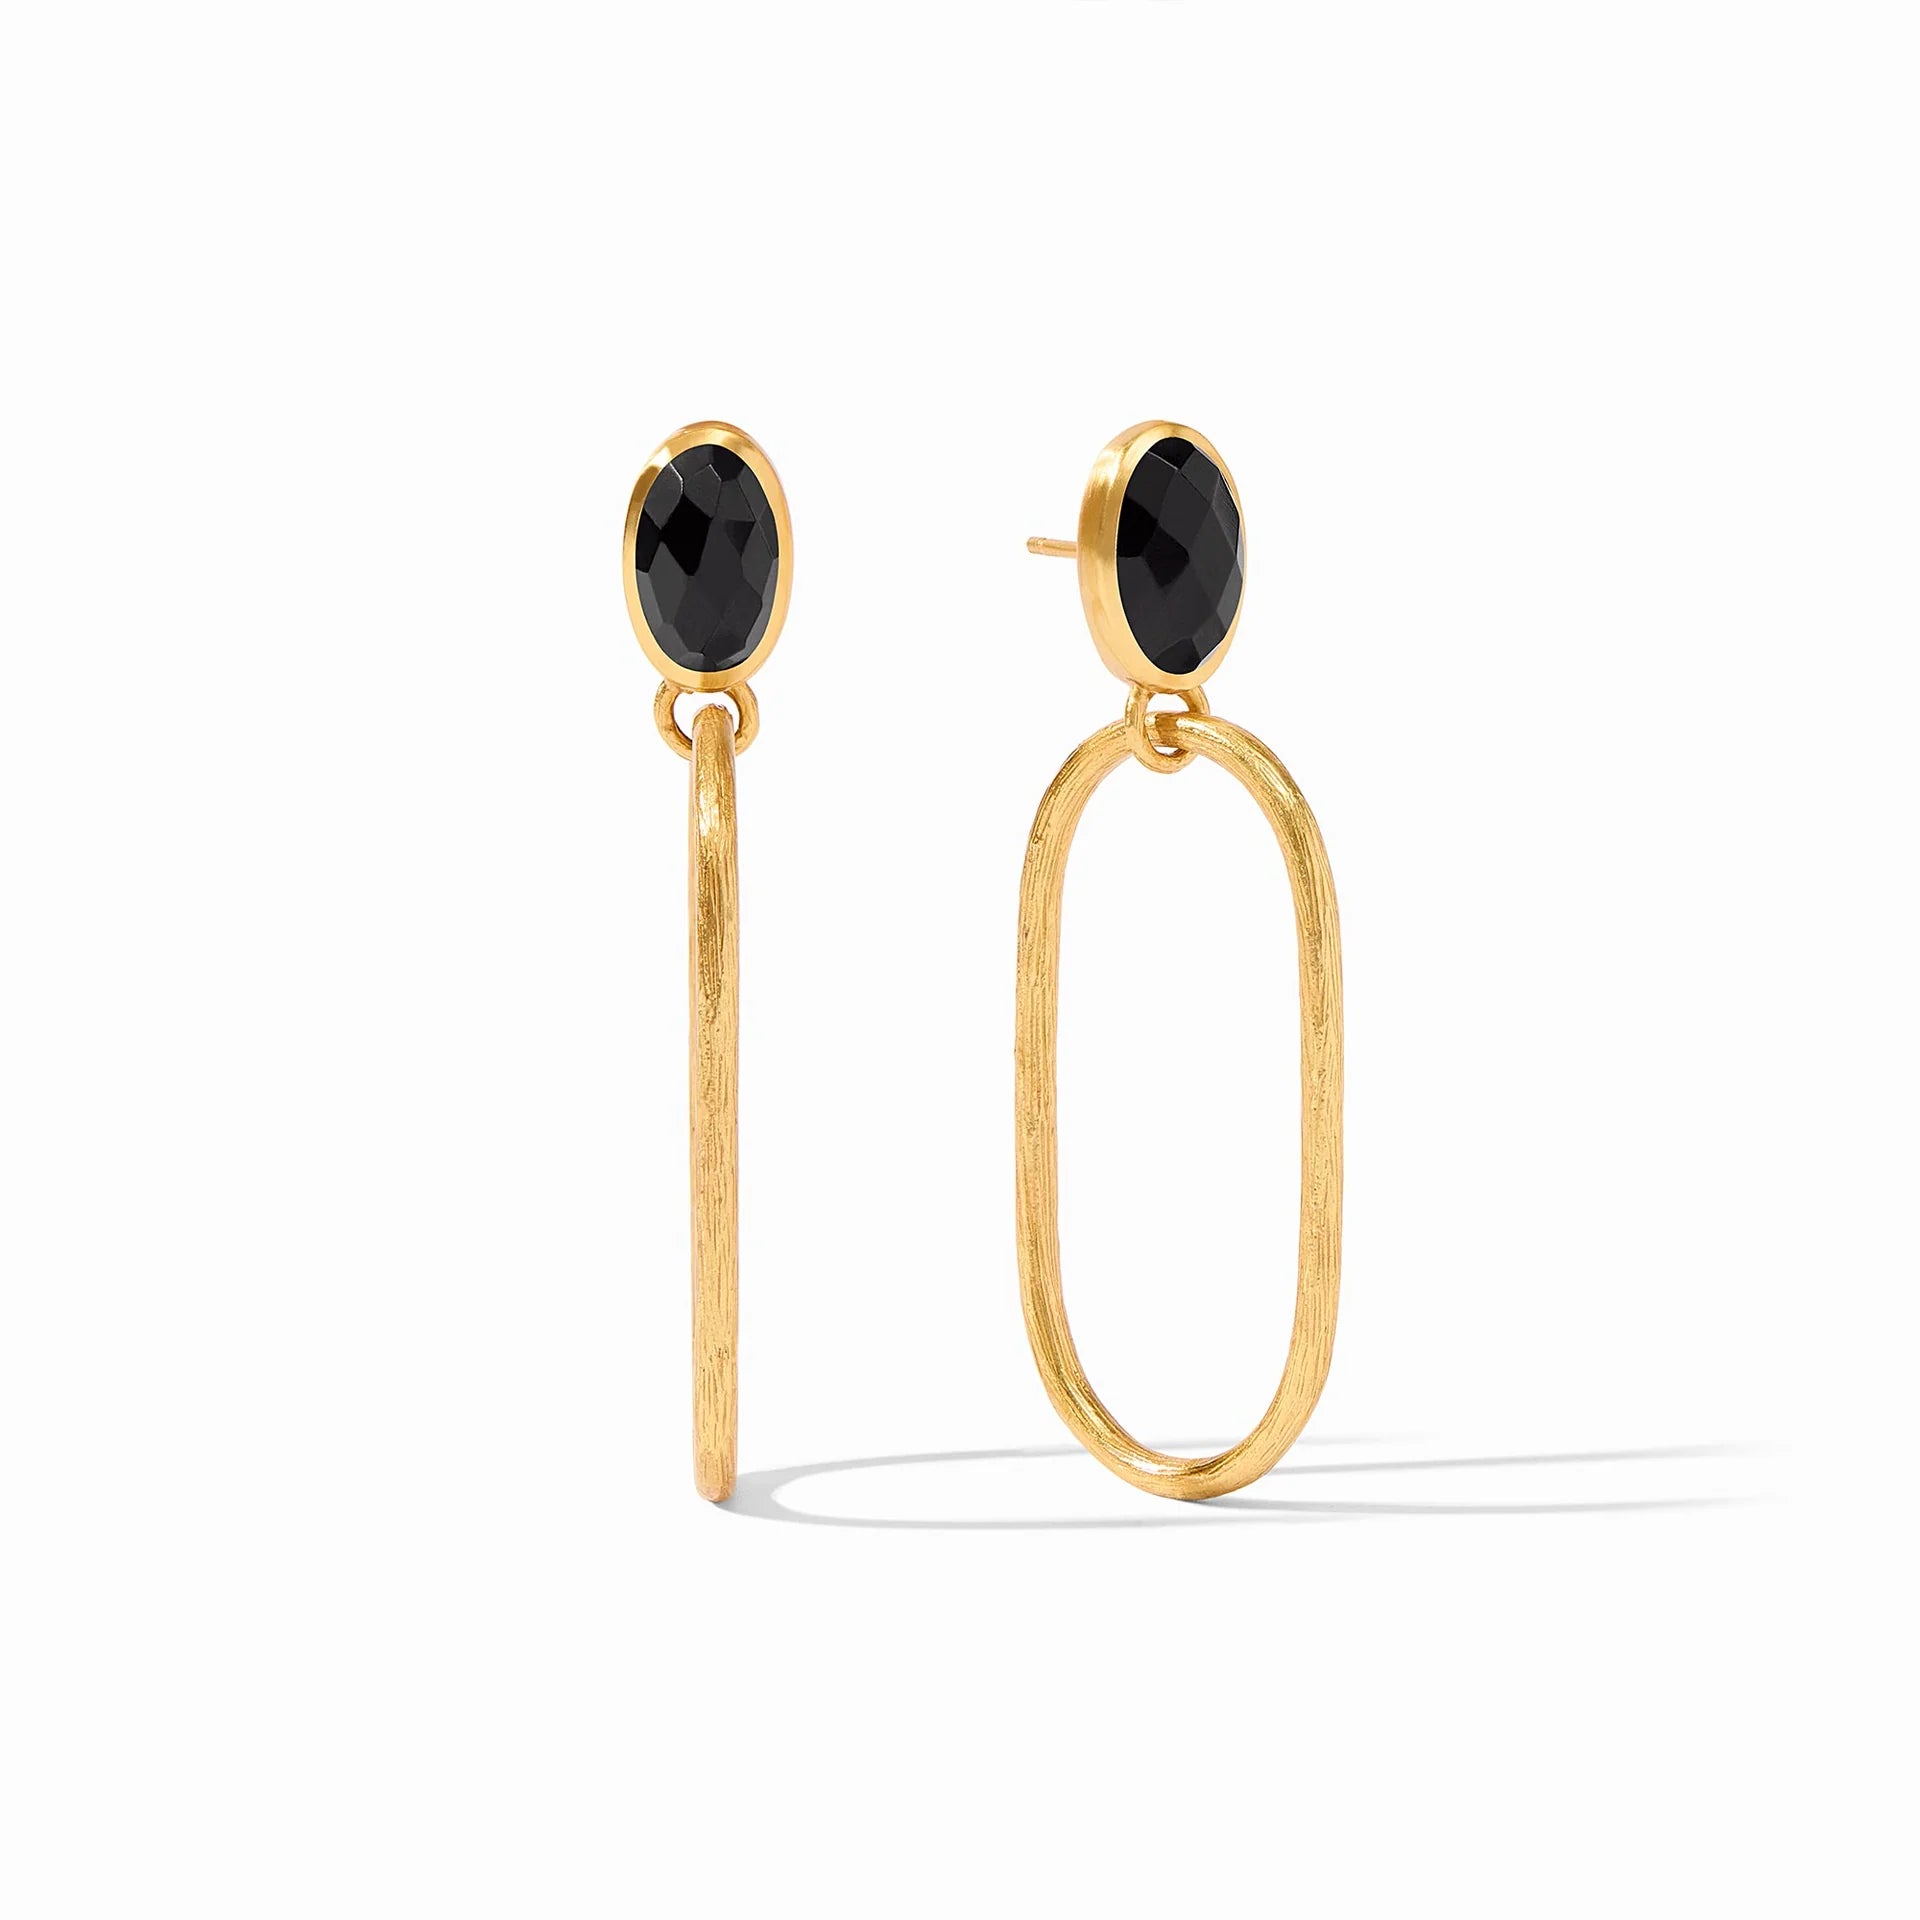 Julie Vos | Ivy Statement Earrings with Obsidian Black Crystals in Gold - Giddy Up Glamour Boutique